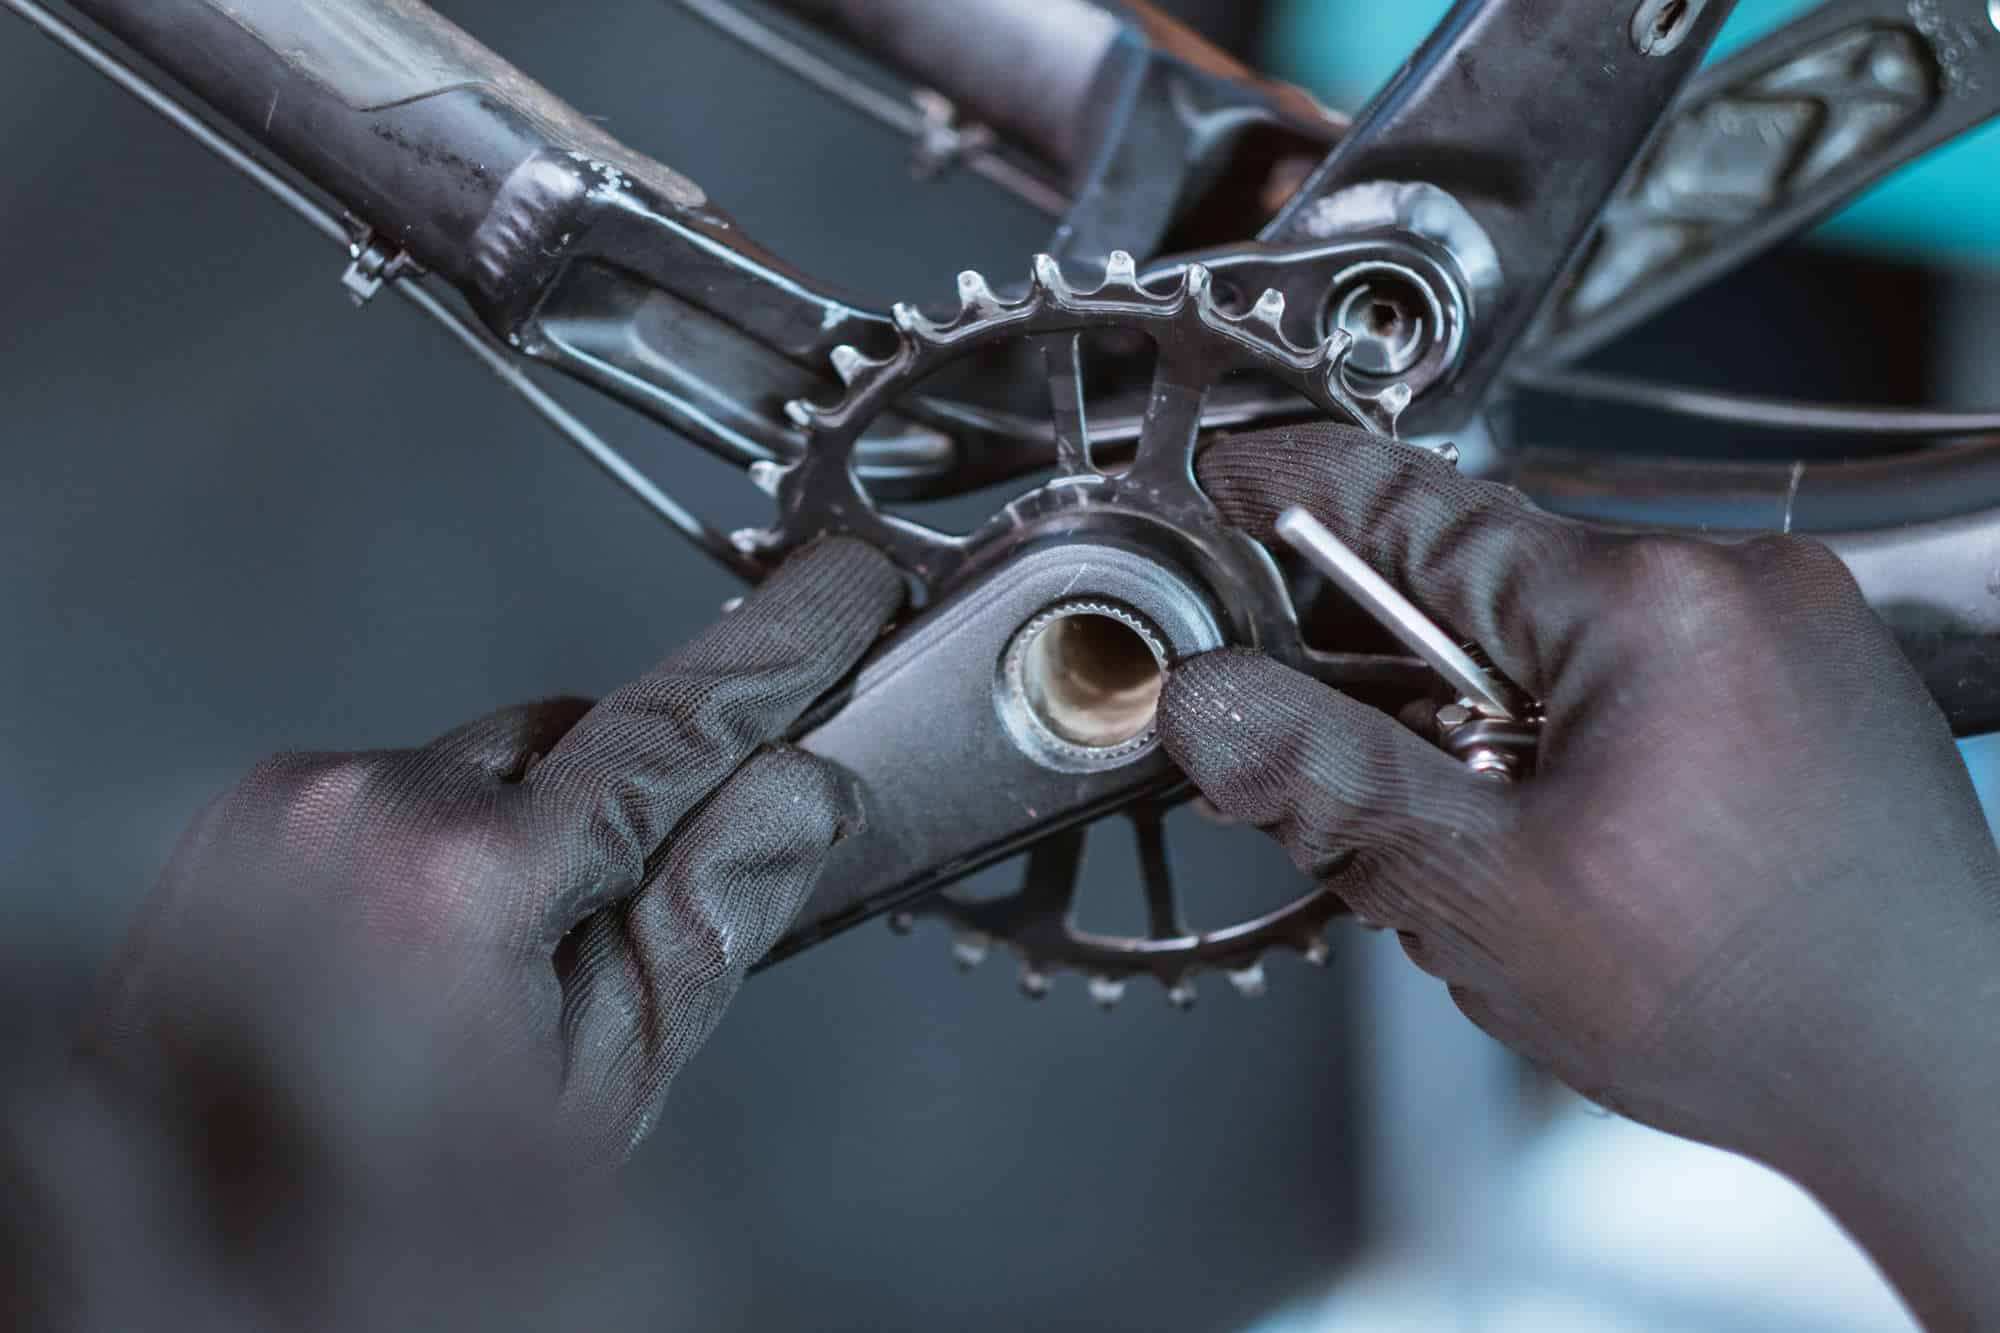 close up of a mechanic’s hand wearing gloves installing the right crank arm on the bottom bracket